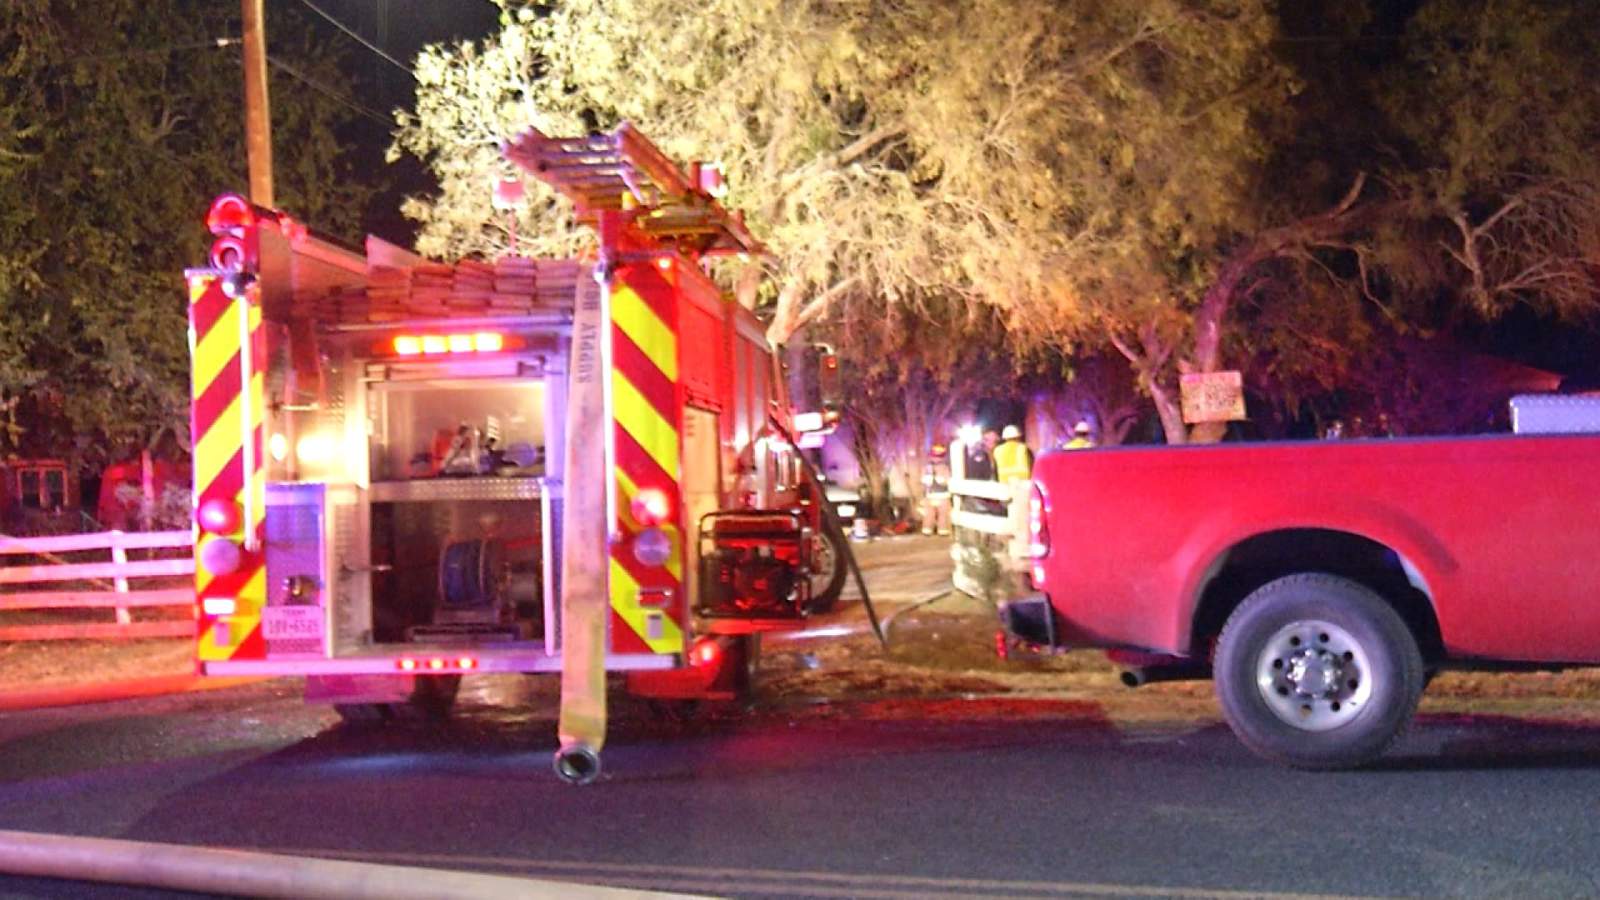 Family of 5 displaced after house fire in Atascosa, BCSO says